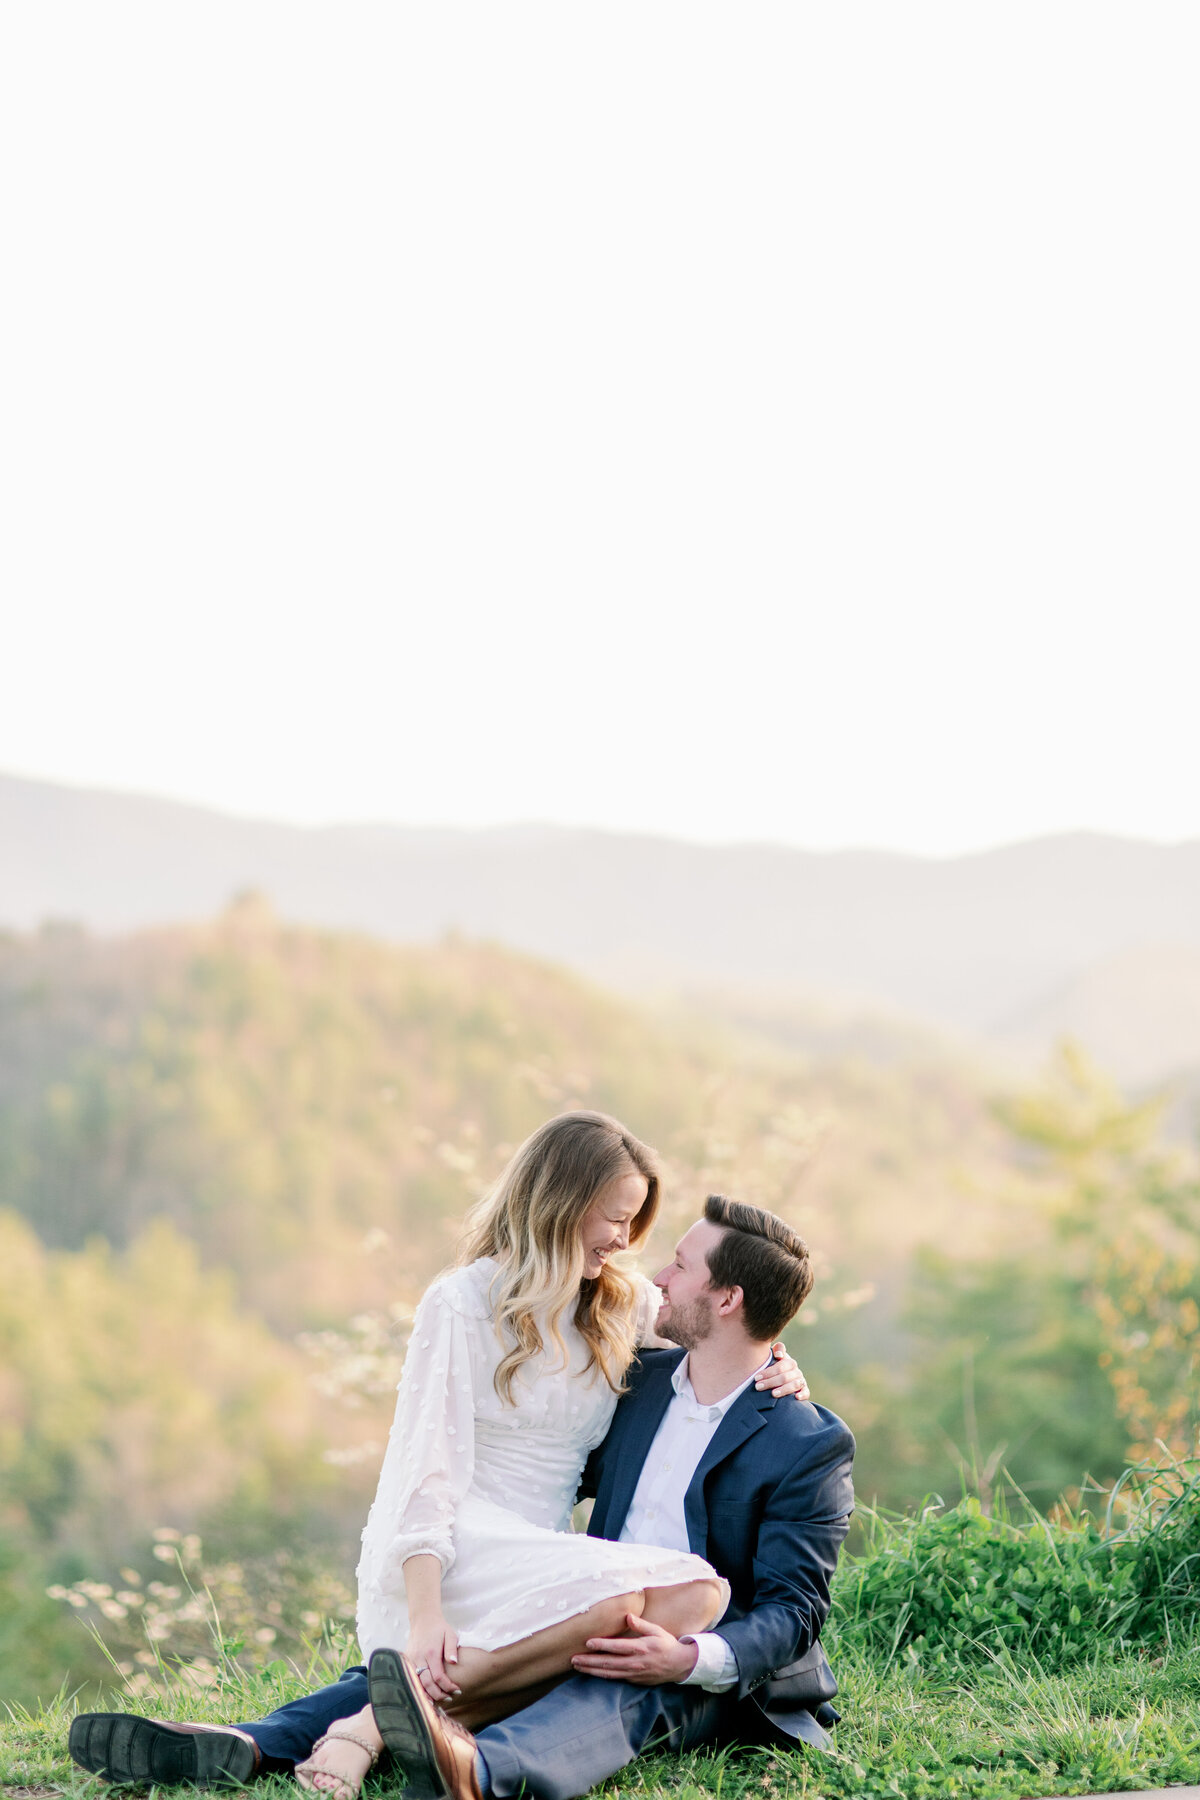 Alyssa and Craig Moutain Engagement - FootHills Parkway - East Tennessee Wedding Photographer - Alaina René Photogrphy-137